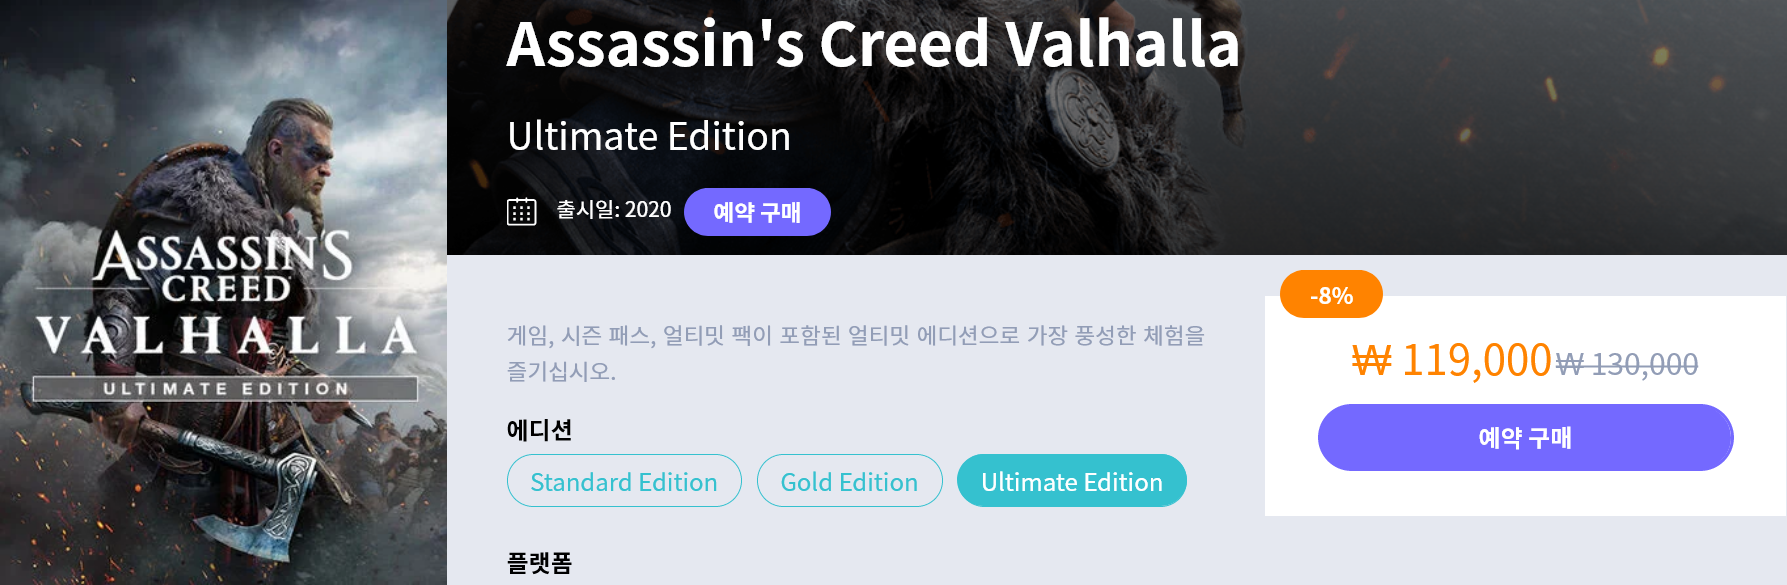 Screenshot_2020-05-01 Assassin's Creed Valhalla - Ultimate.png